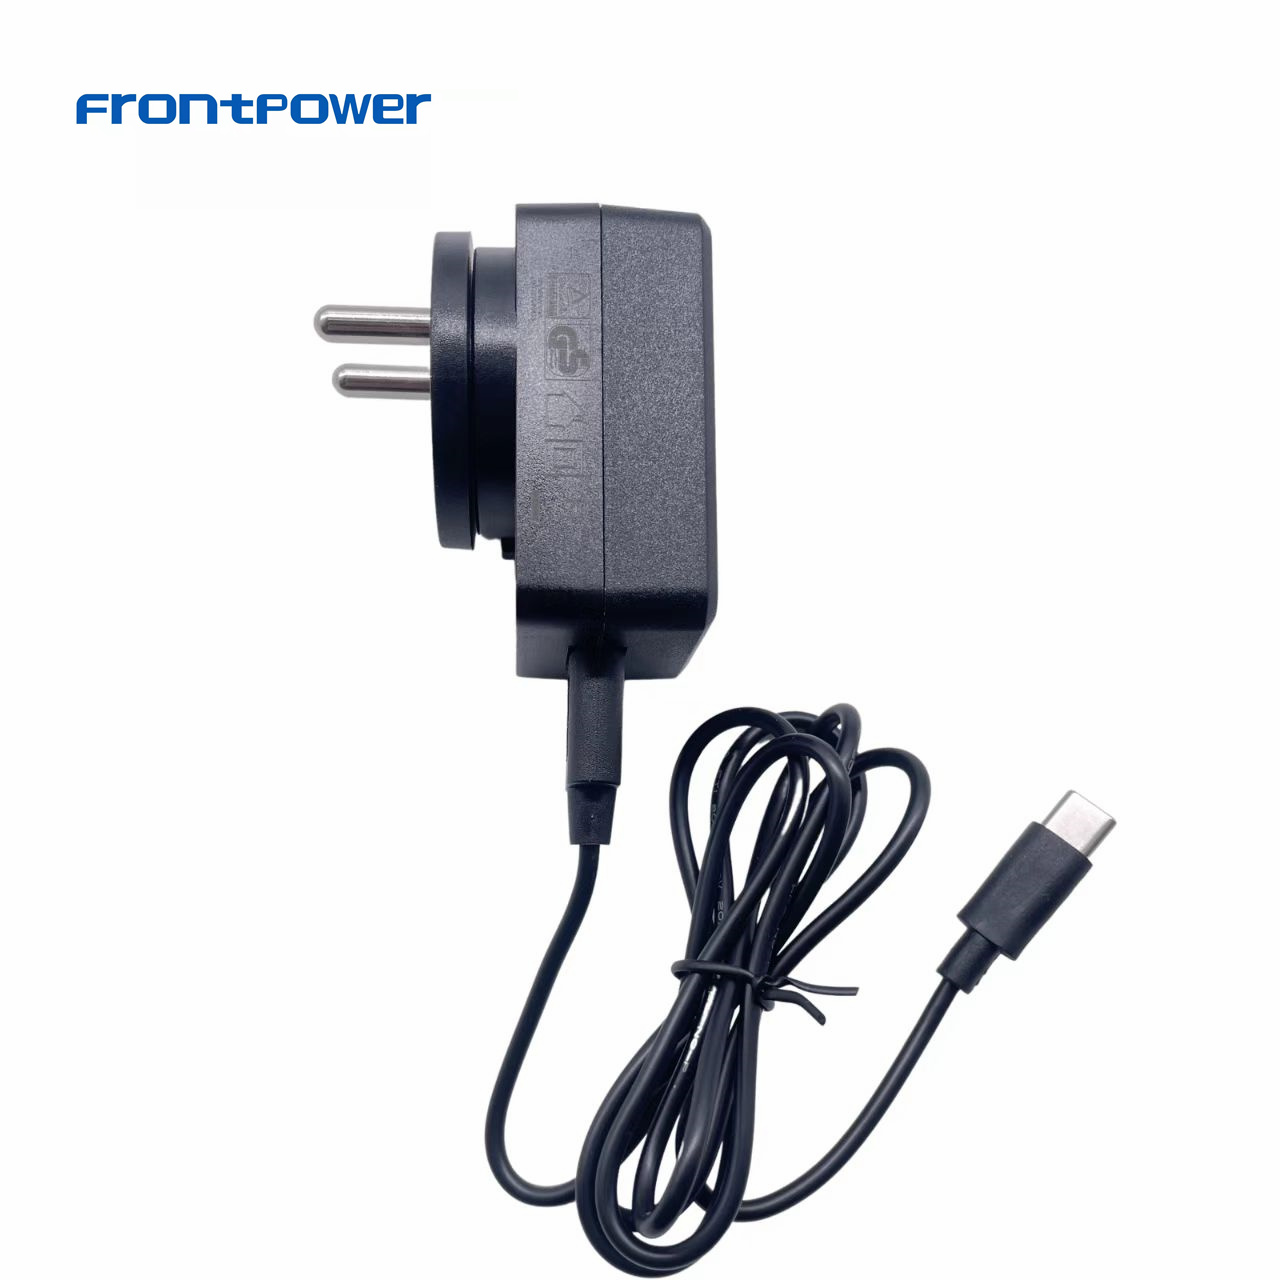 5V 2A wall mount power adapter with BIS certification